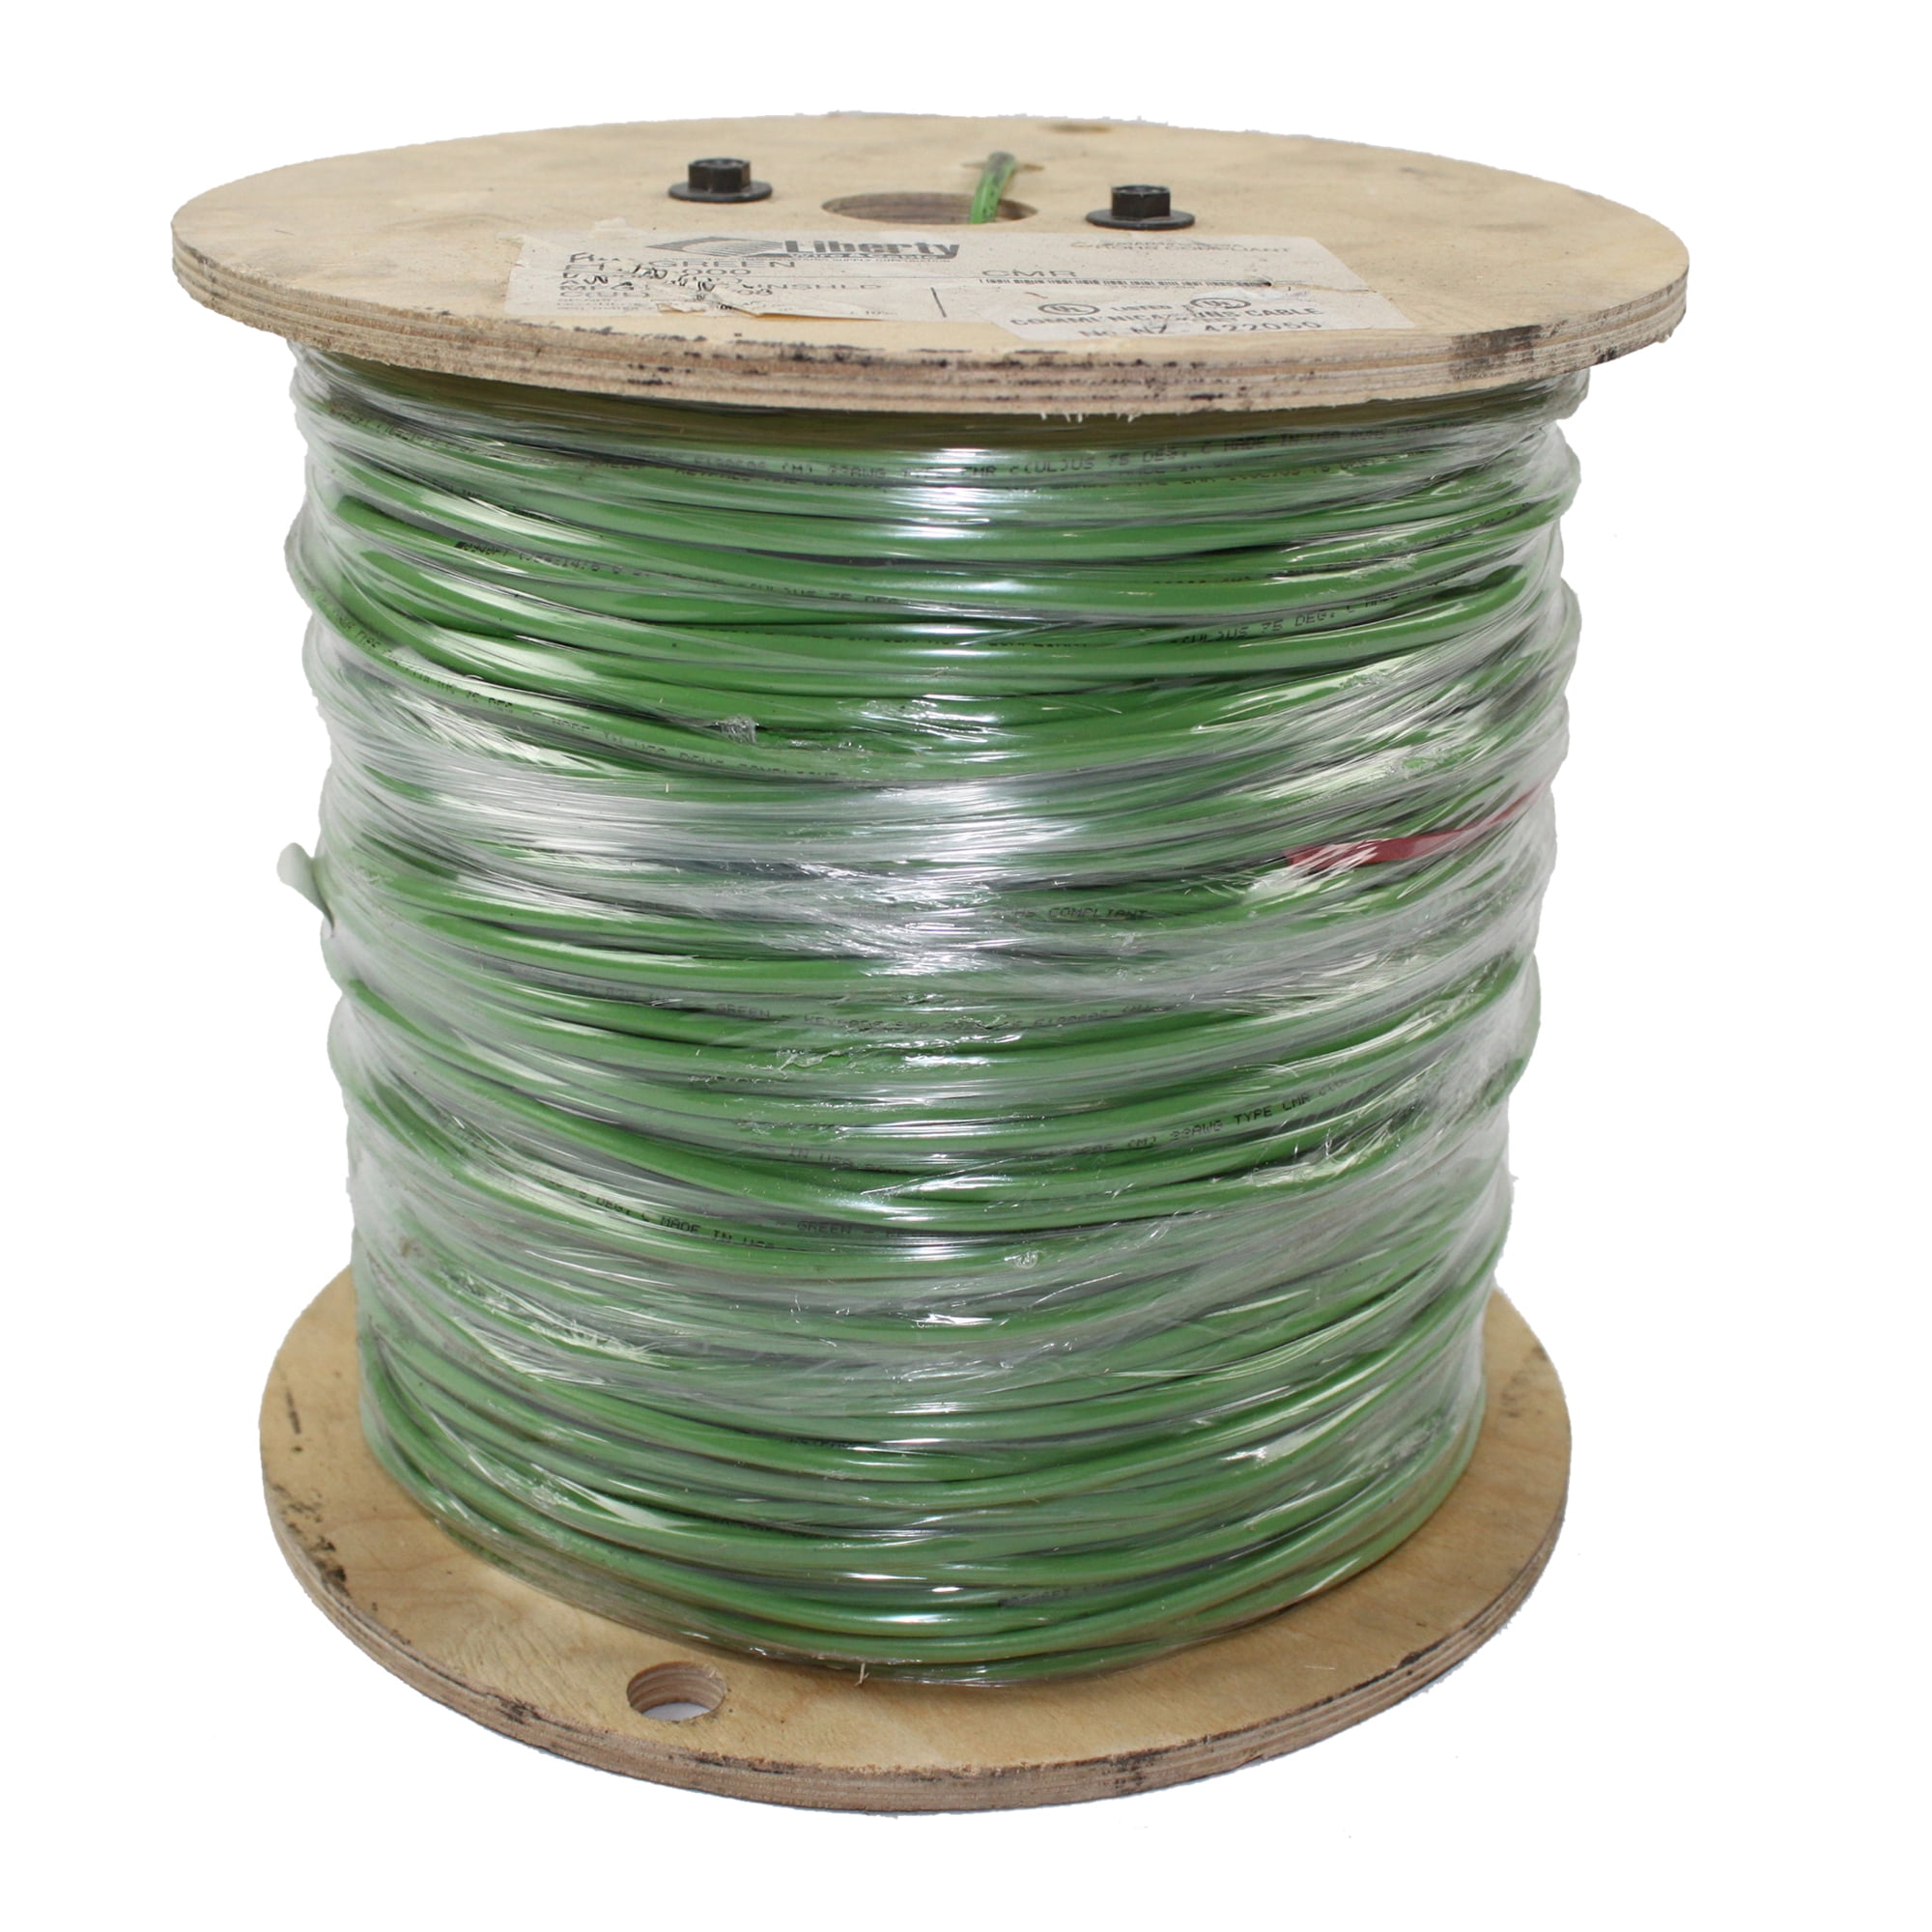 Solid CCS CCTV Bulk Coax Direct Burial Cable Spool Black 18AWG Syston 1000ft Quad Shield Outdoor RG-59/U 3.0 GHz